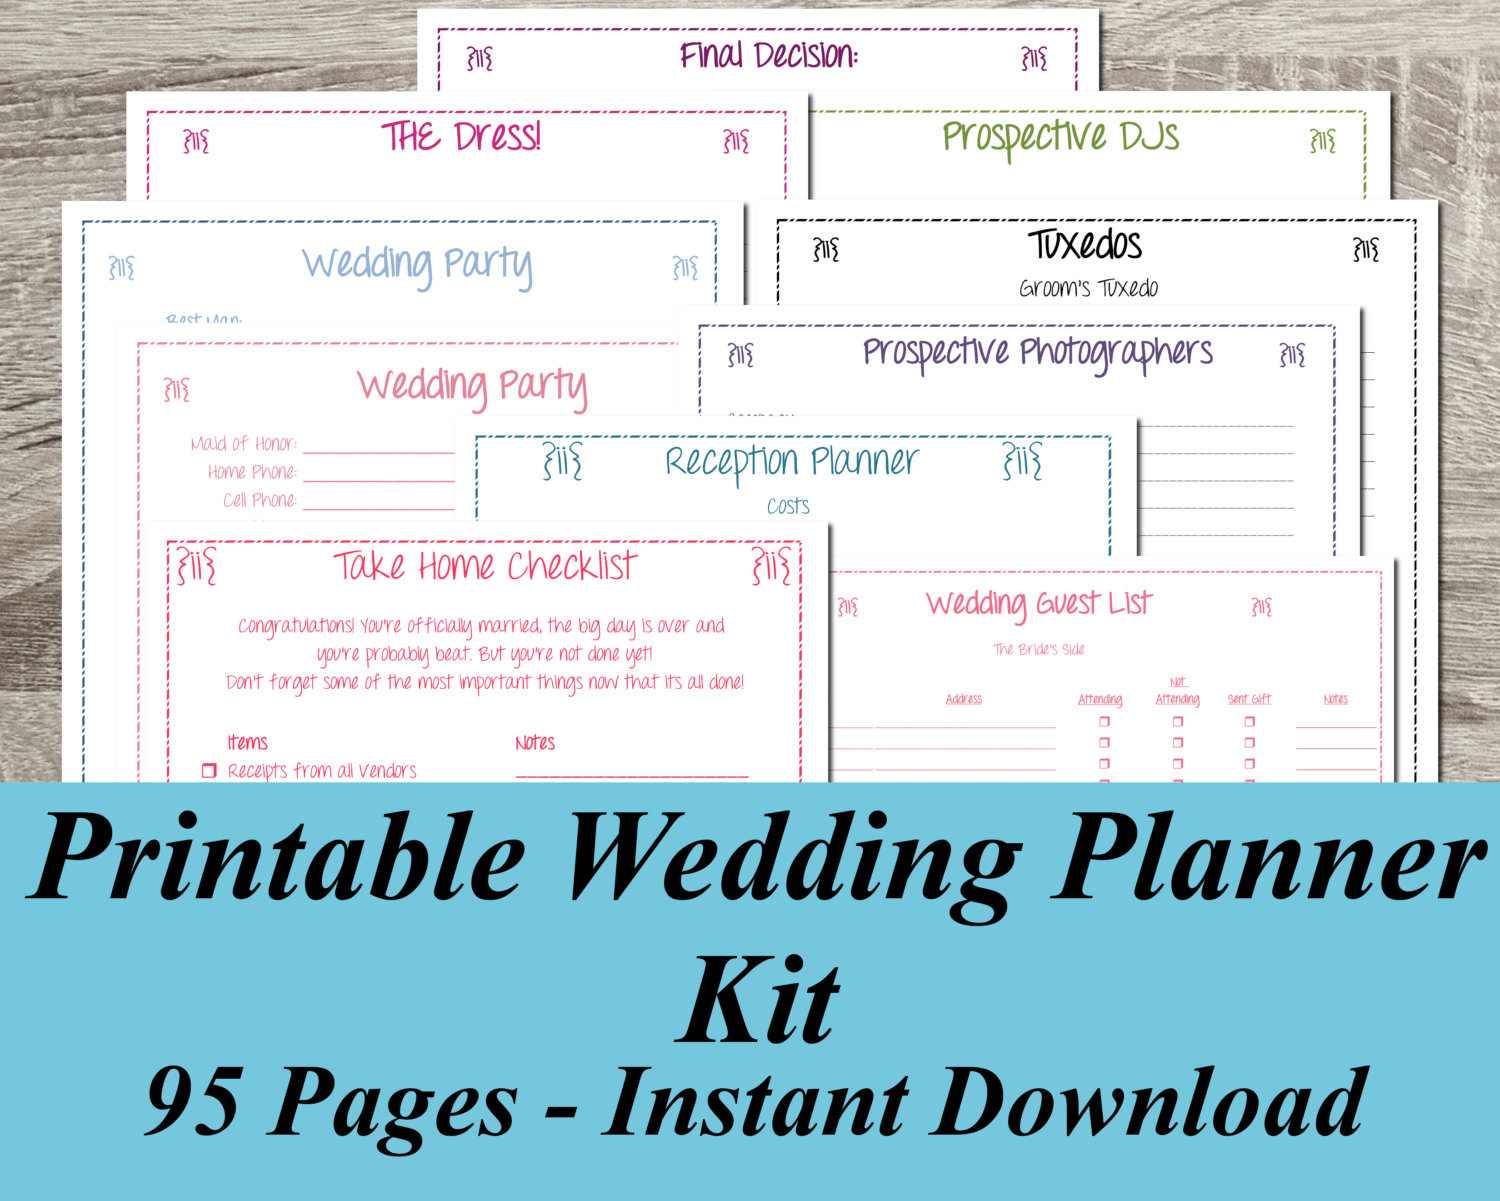 Gorgeous Free Wedding Planning Book 7 Free Printable Wedding Planner - Free Printable Wedding Planner Forms